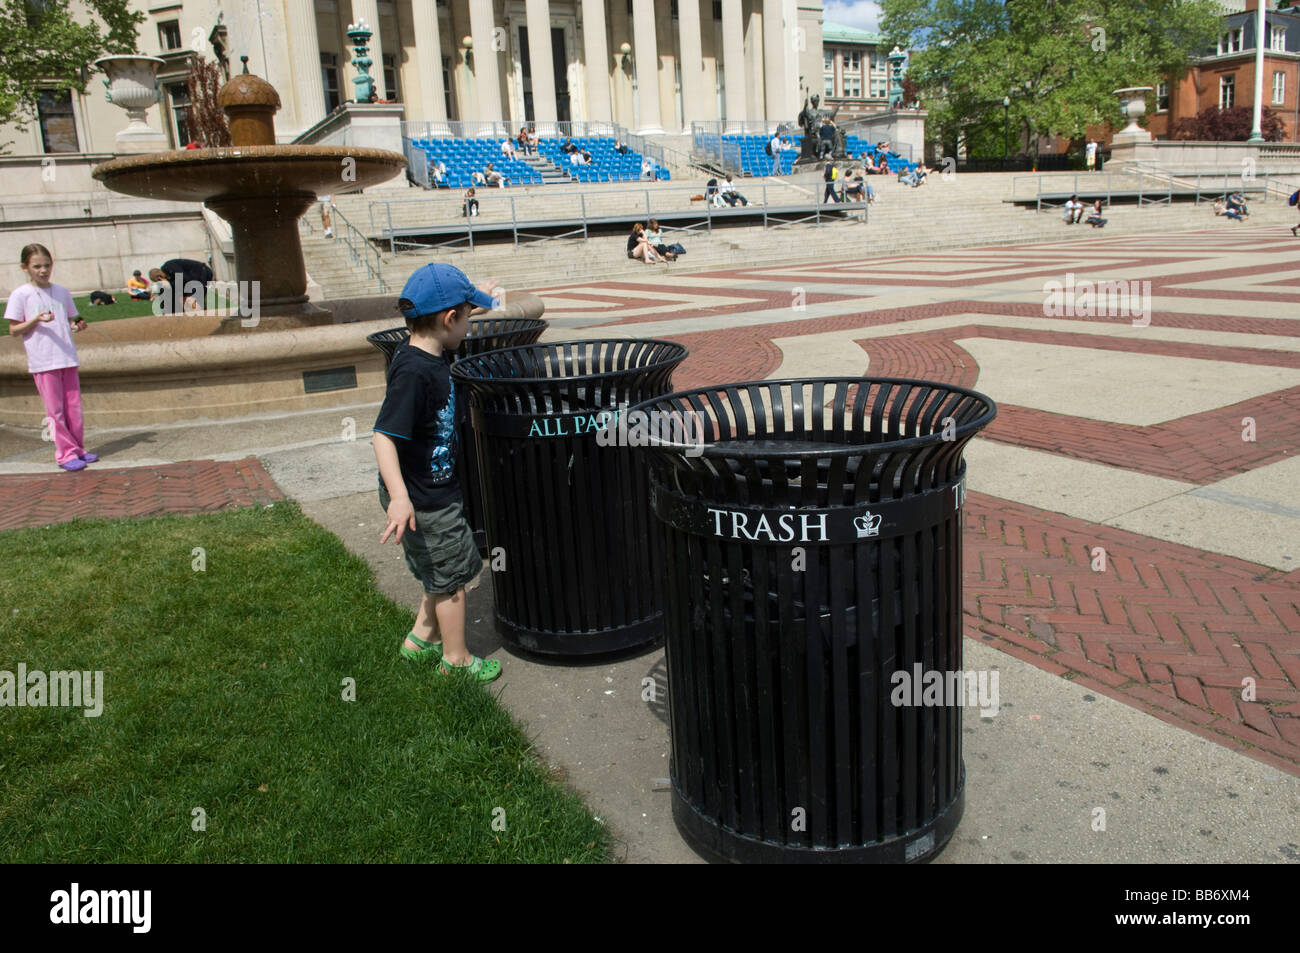 A young boy recycles into a recycling bin at the Columbia University campus in New York Stock Photo